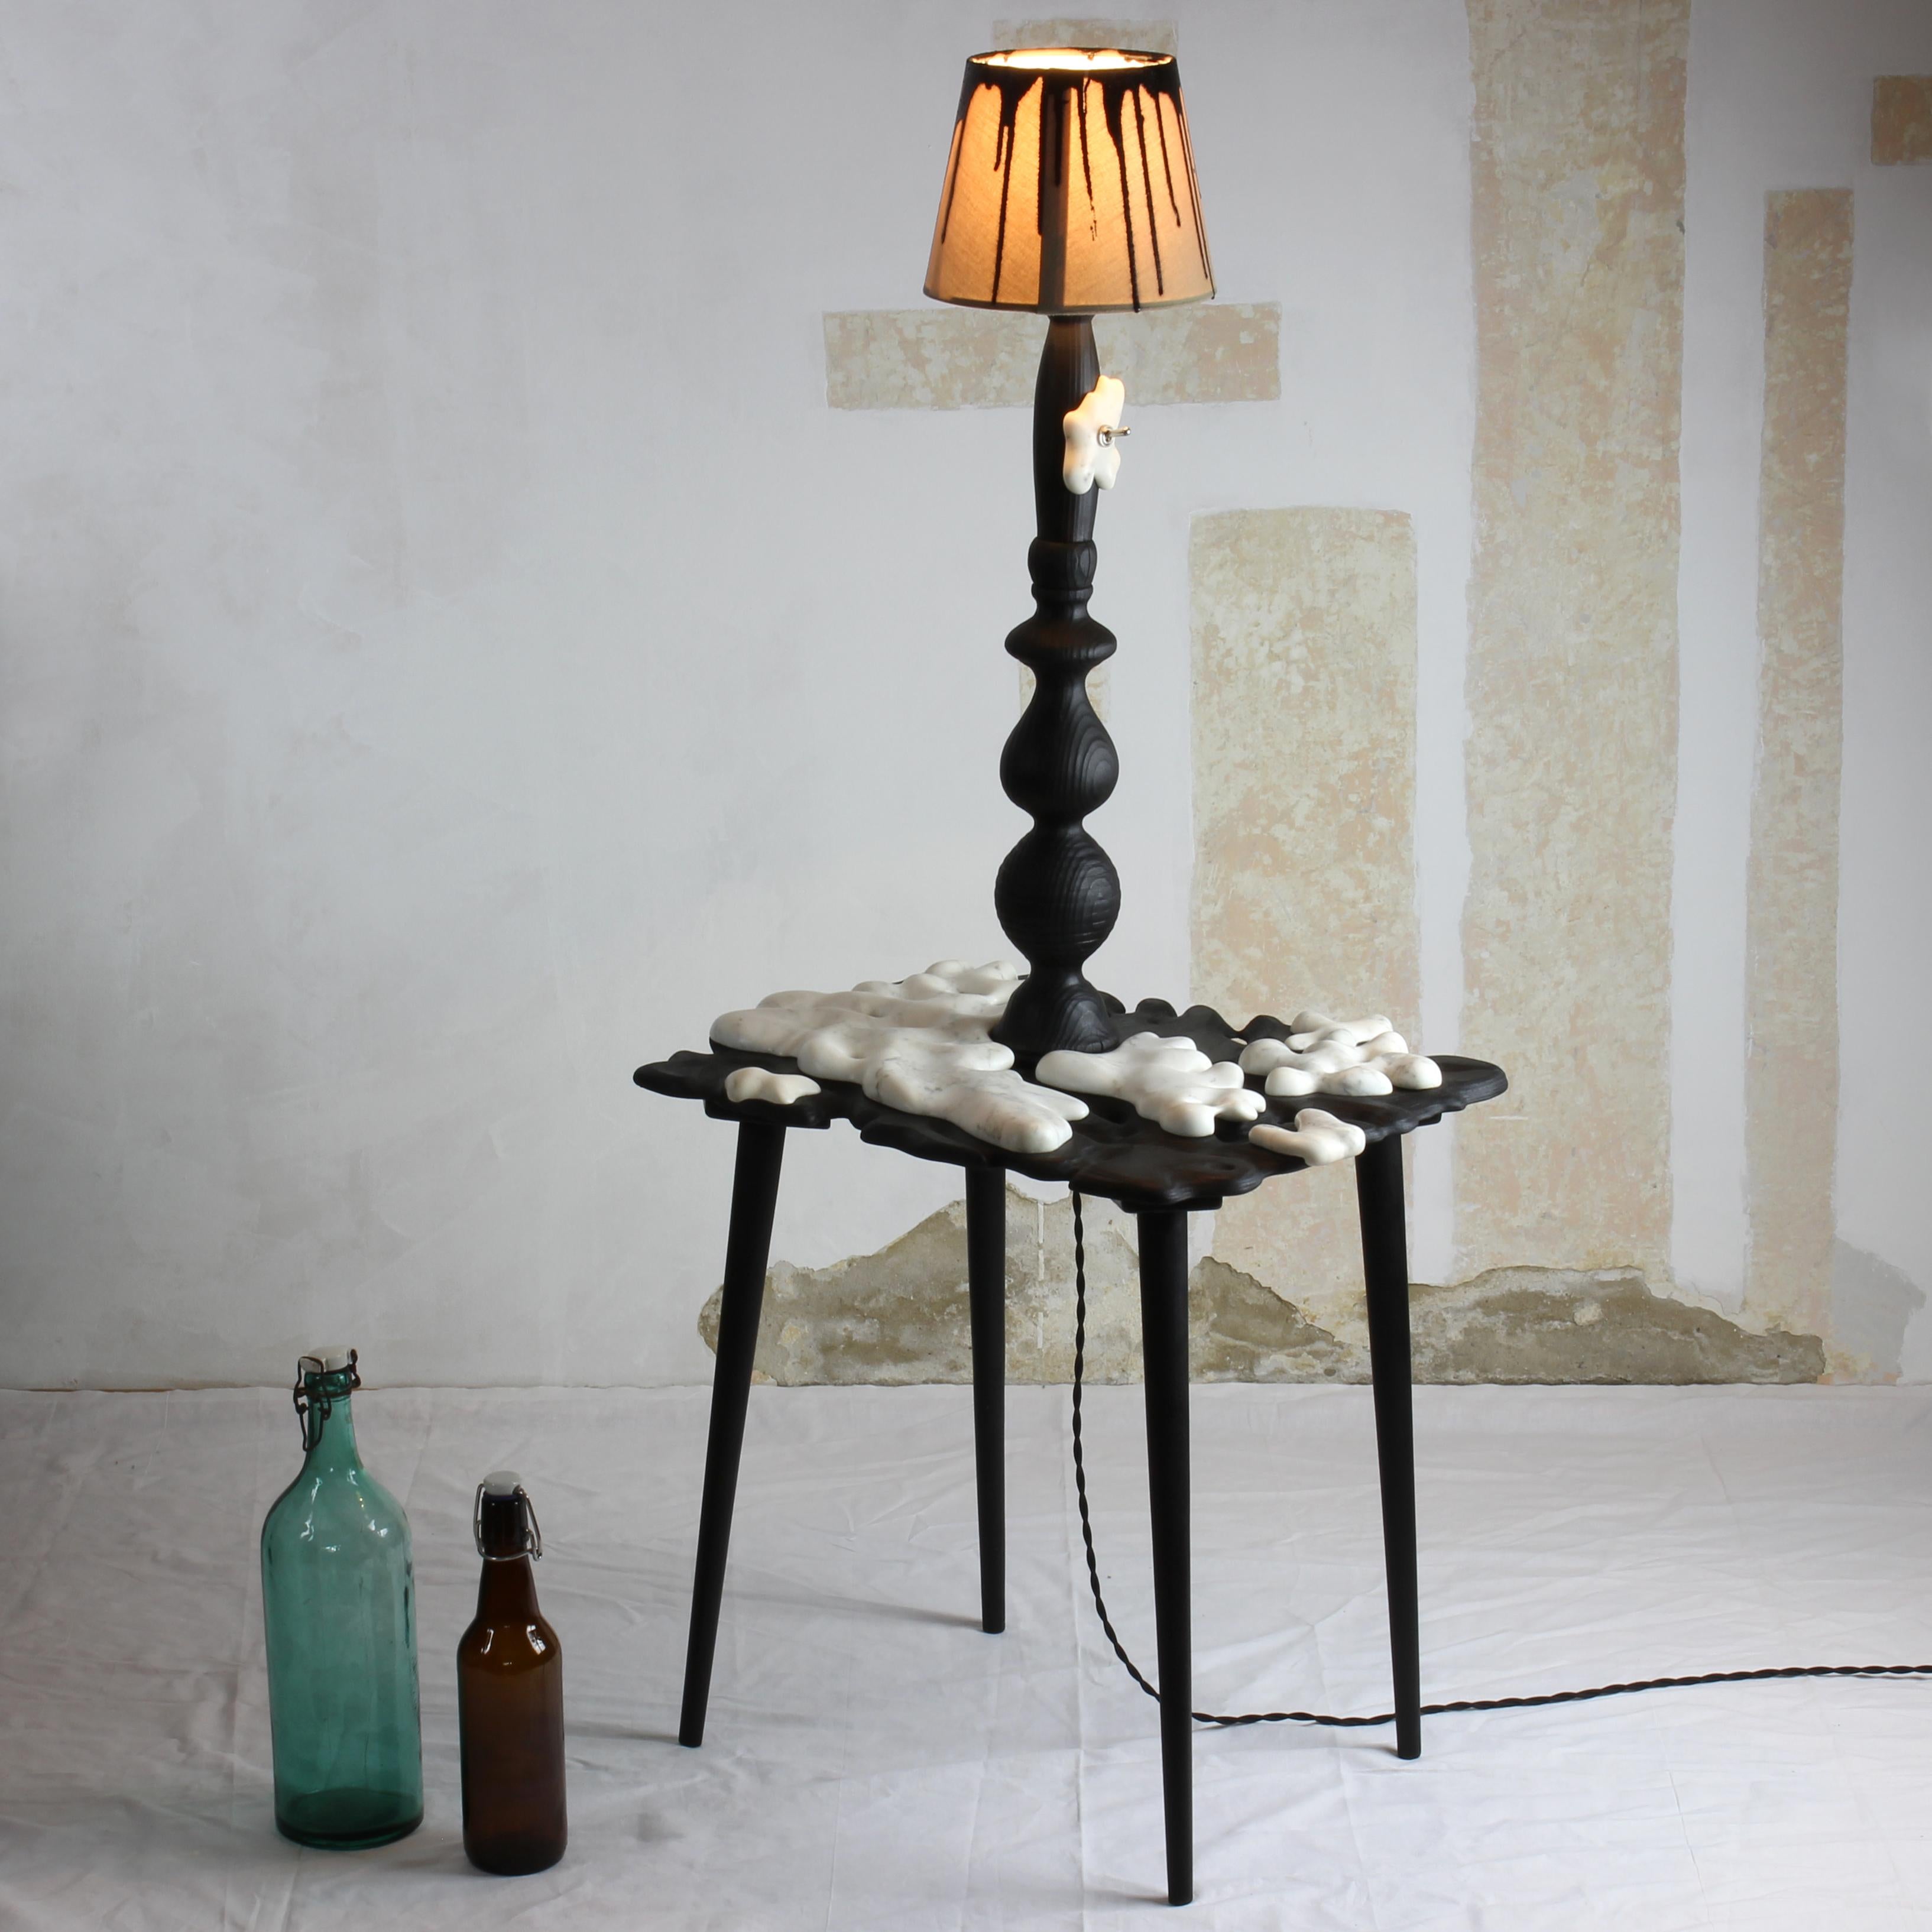 Collectible design, art sculpture, mood lightning, one of a kind organic shaped floor lamp, is made from repurposed wood parts of furniture (mid-century style stool and part of a table lamp) and leftover white marble. The wiring and lampshade is